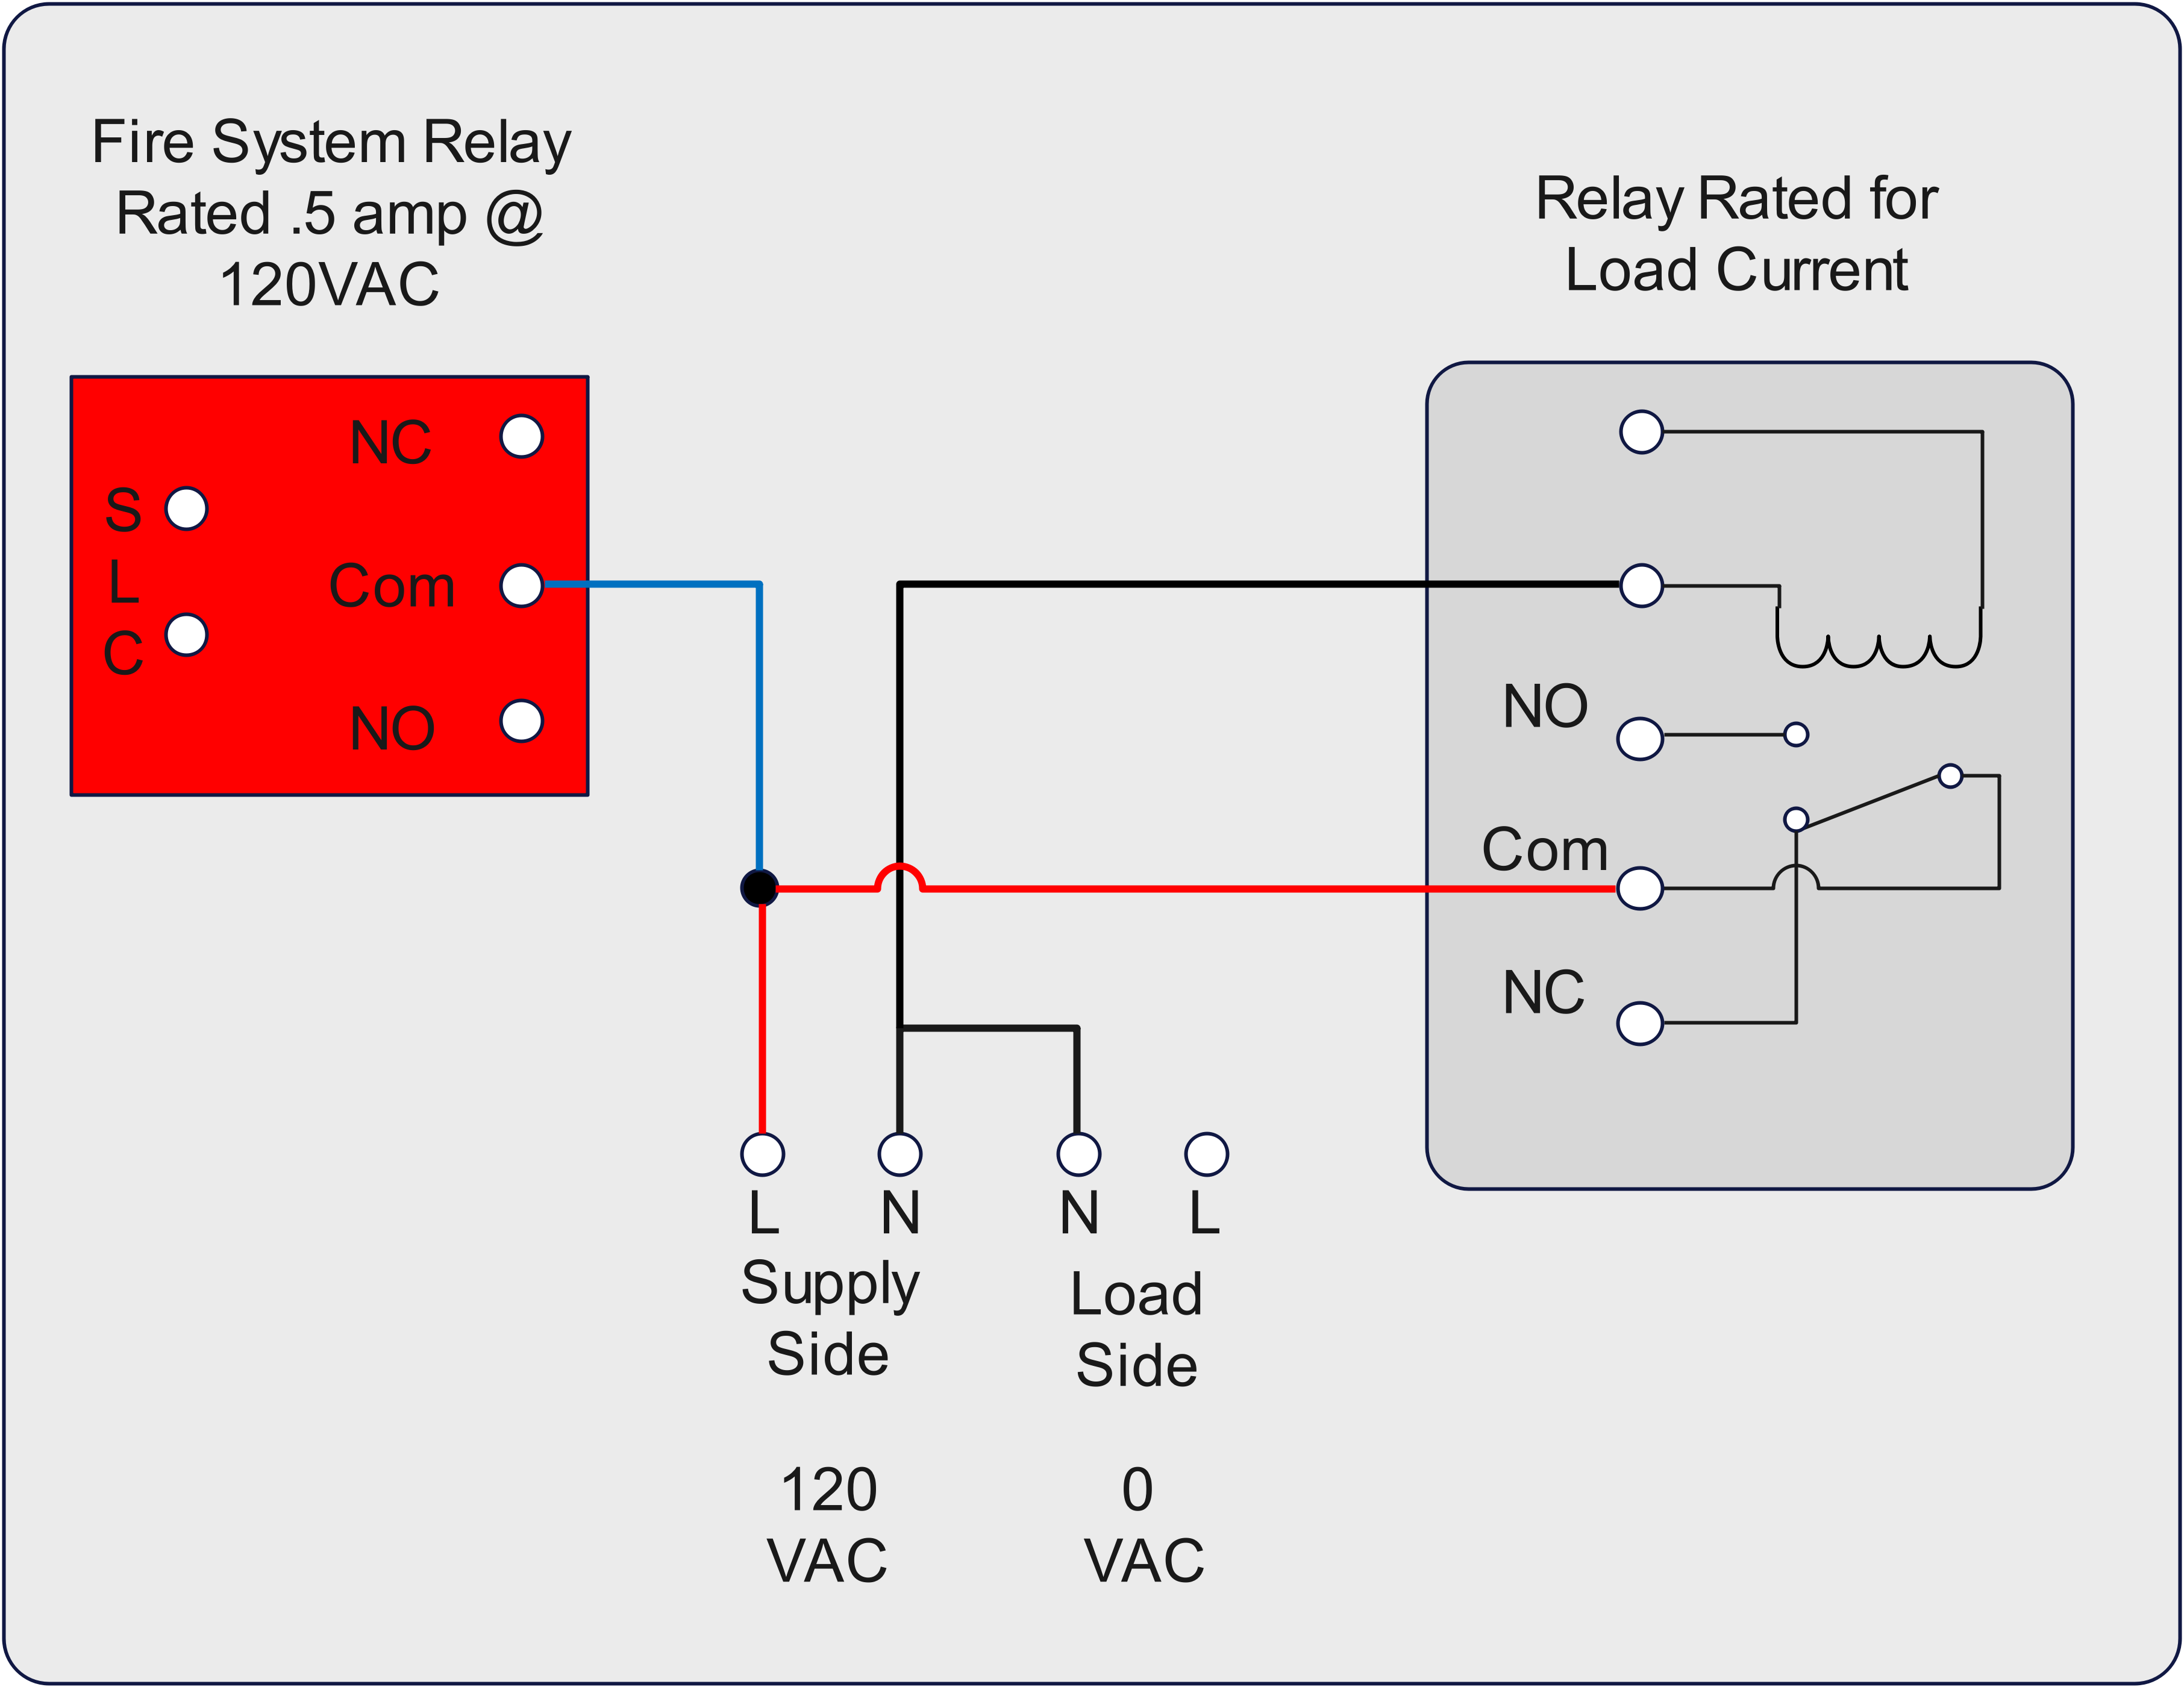 Fire Relay activated removes power from the high current relay, powering down the HVAC equipment